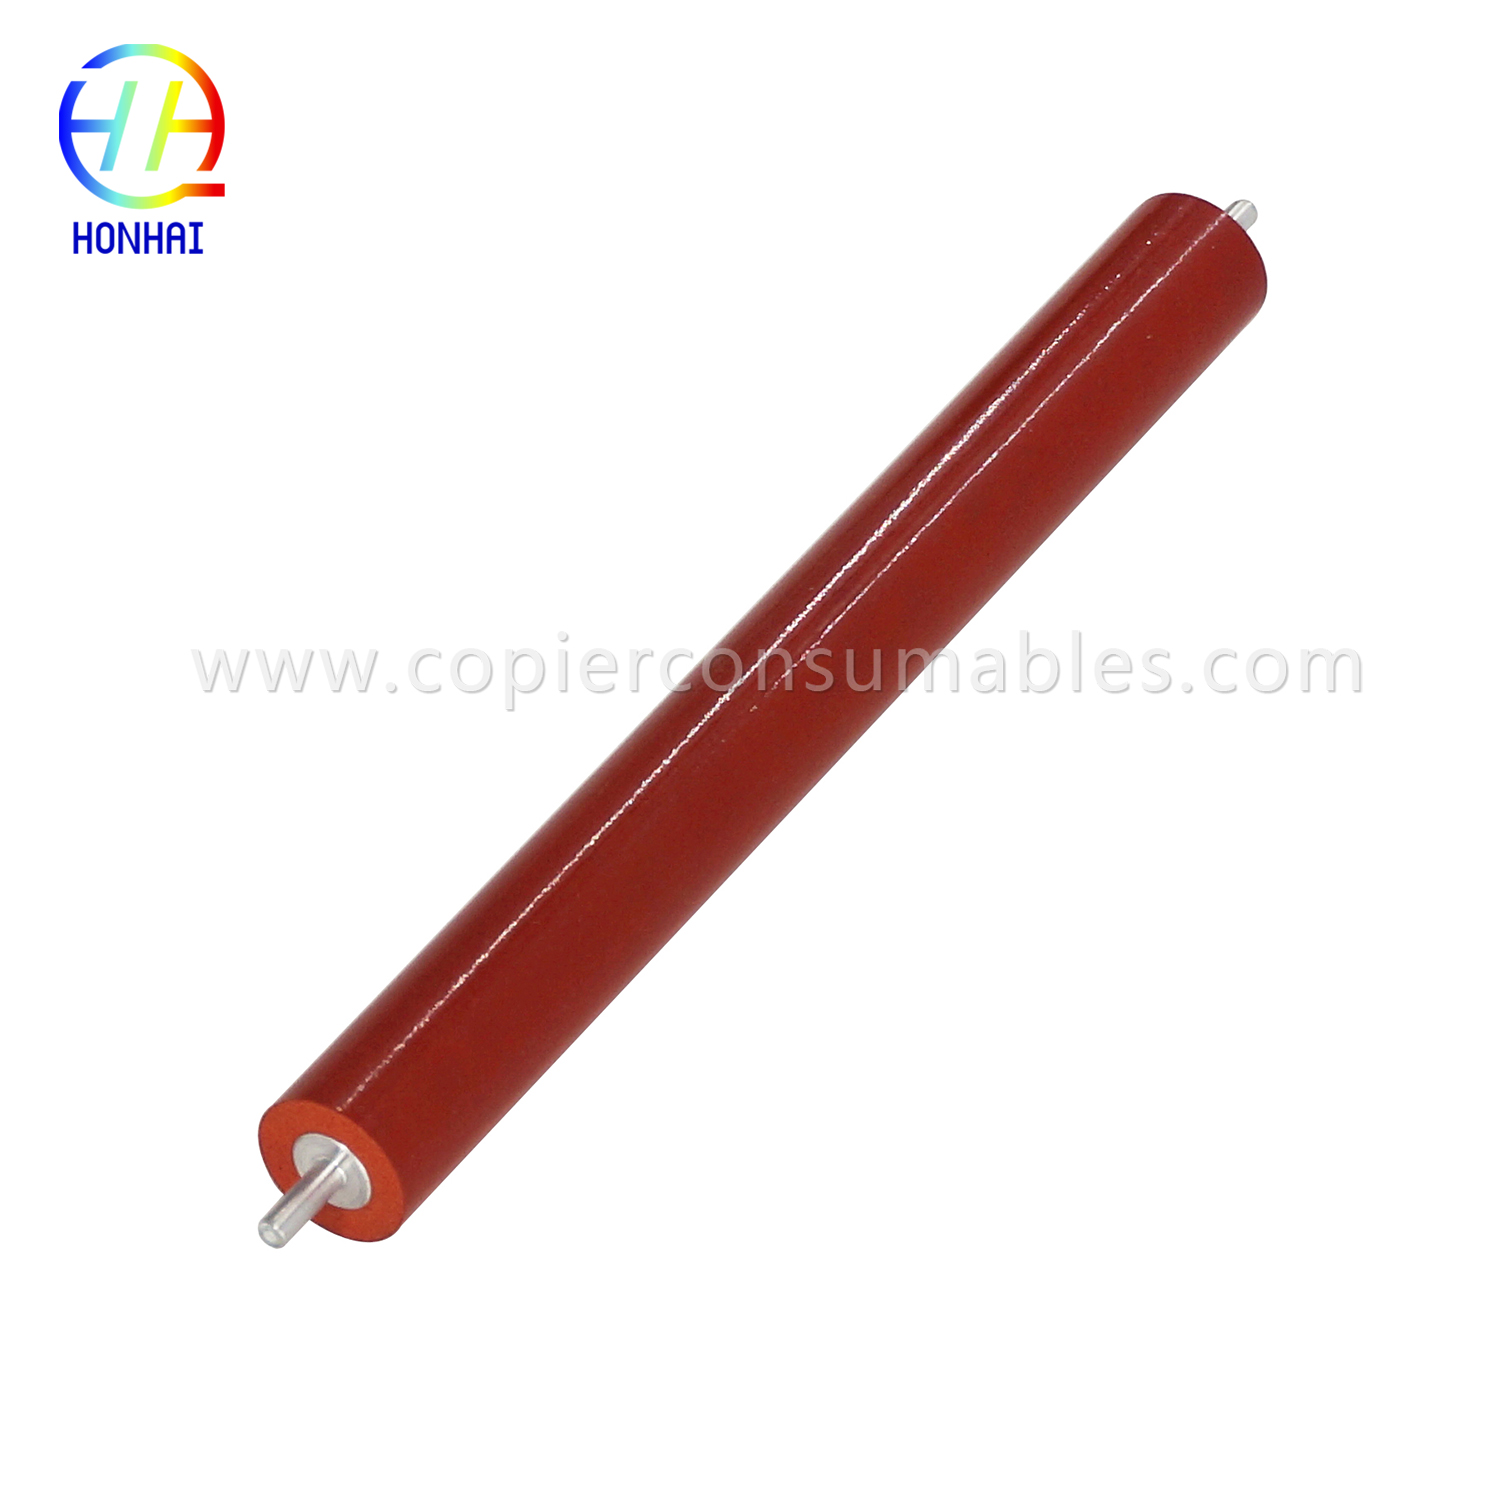 Lower Pressure Roller Brother HL 3140 3150 3170 MFC 9120 9130 9133 9140 9330 9340 DCP 9020 (TN251 TN255) (8) 拷贝